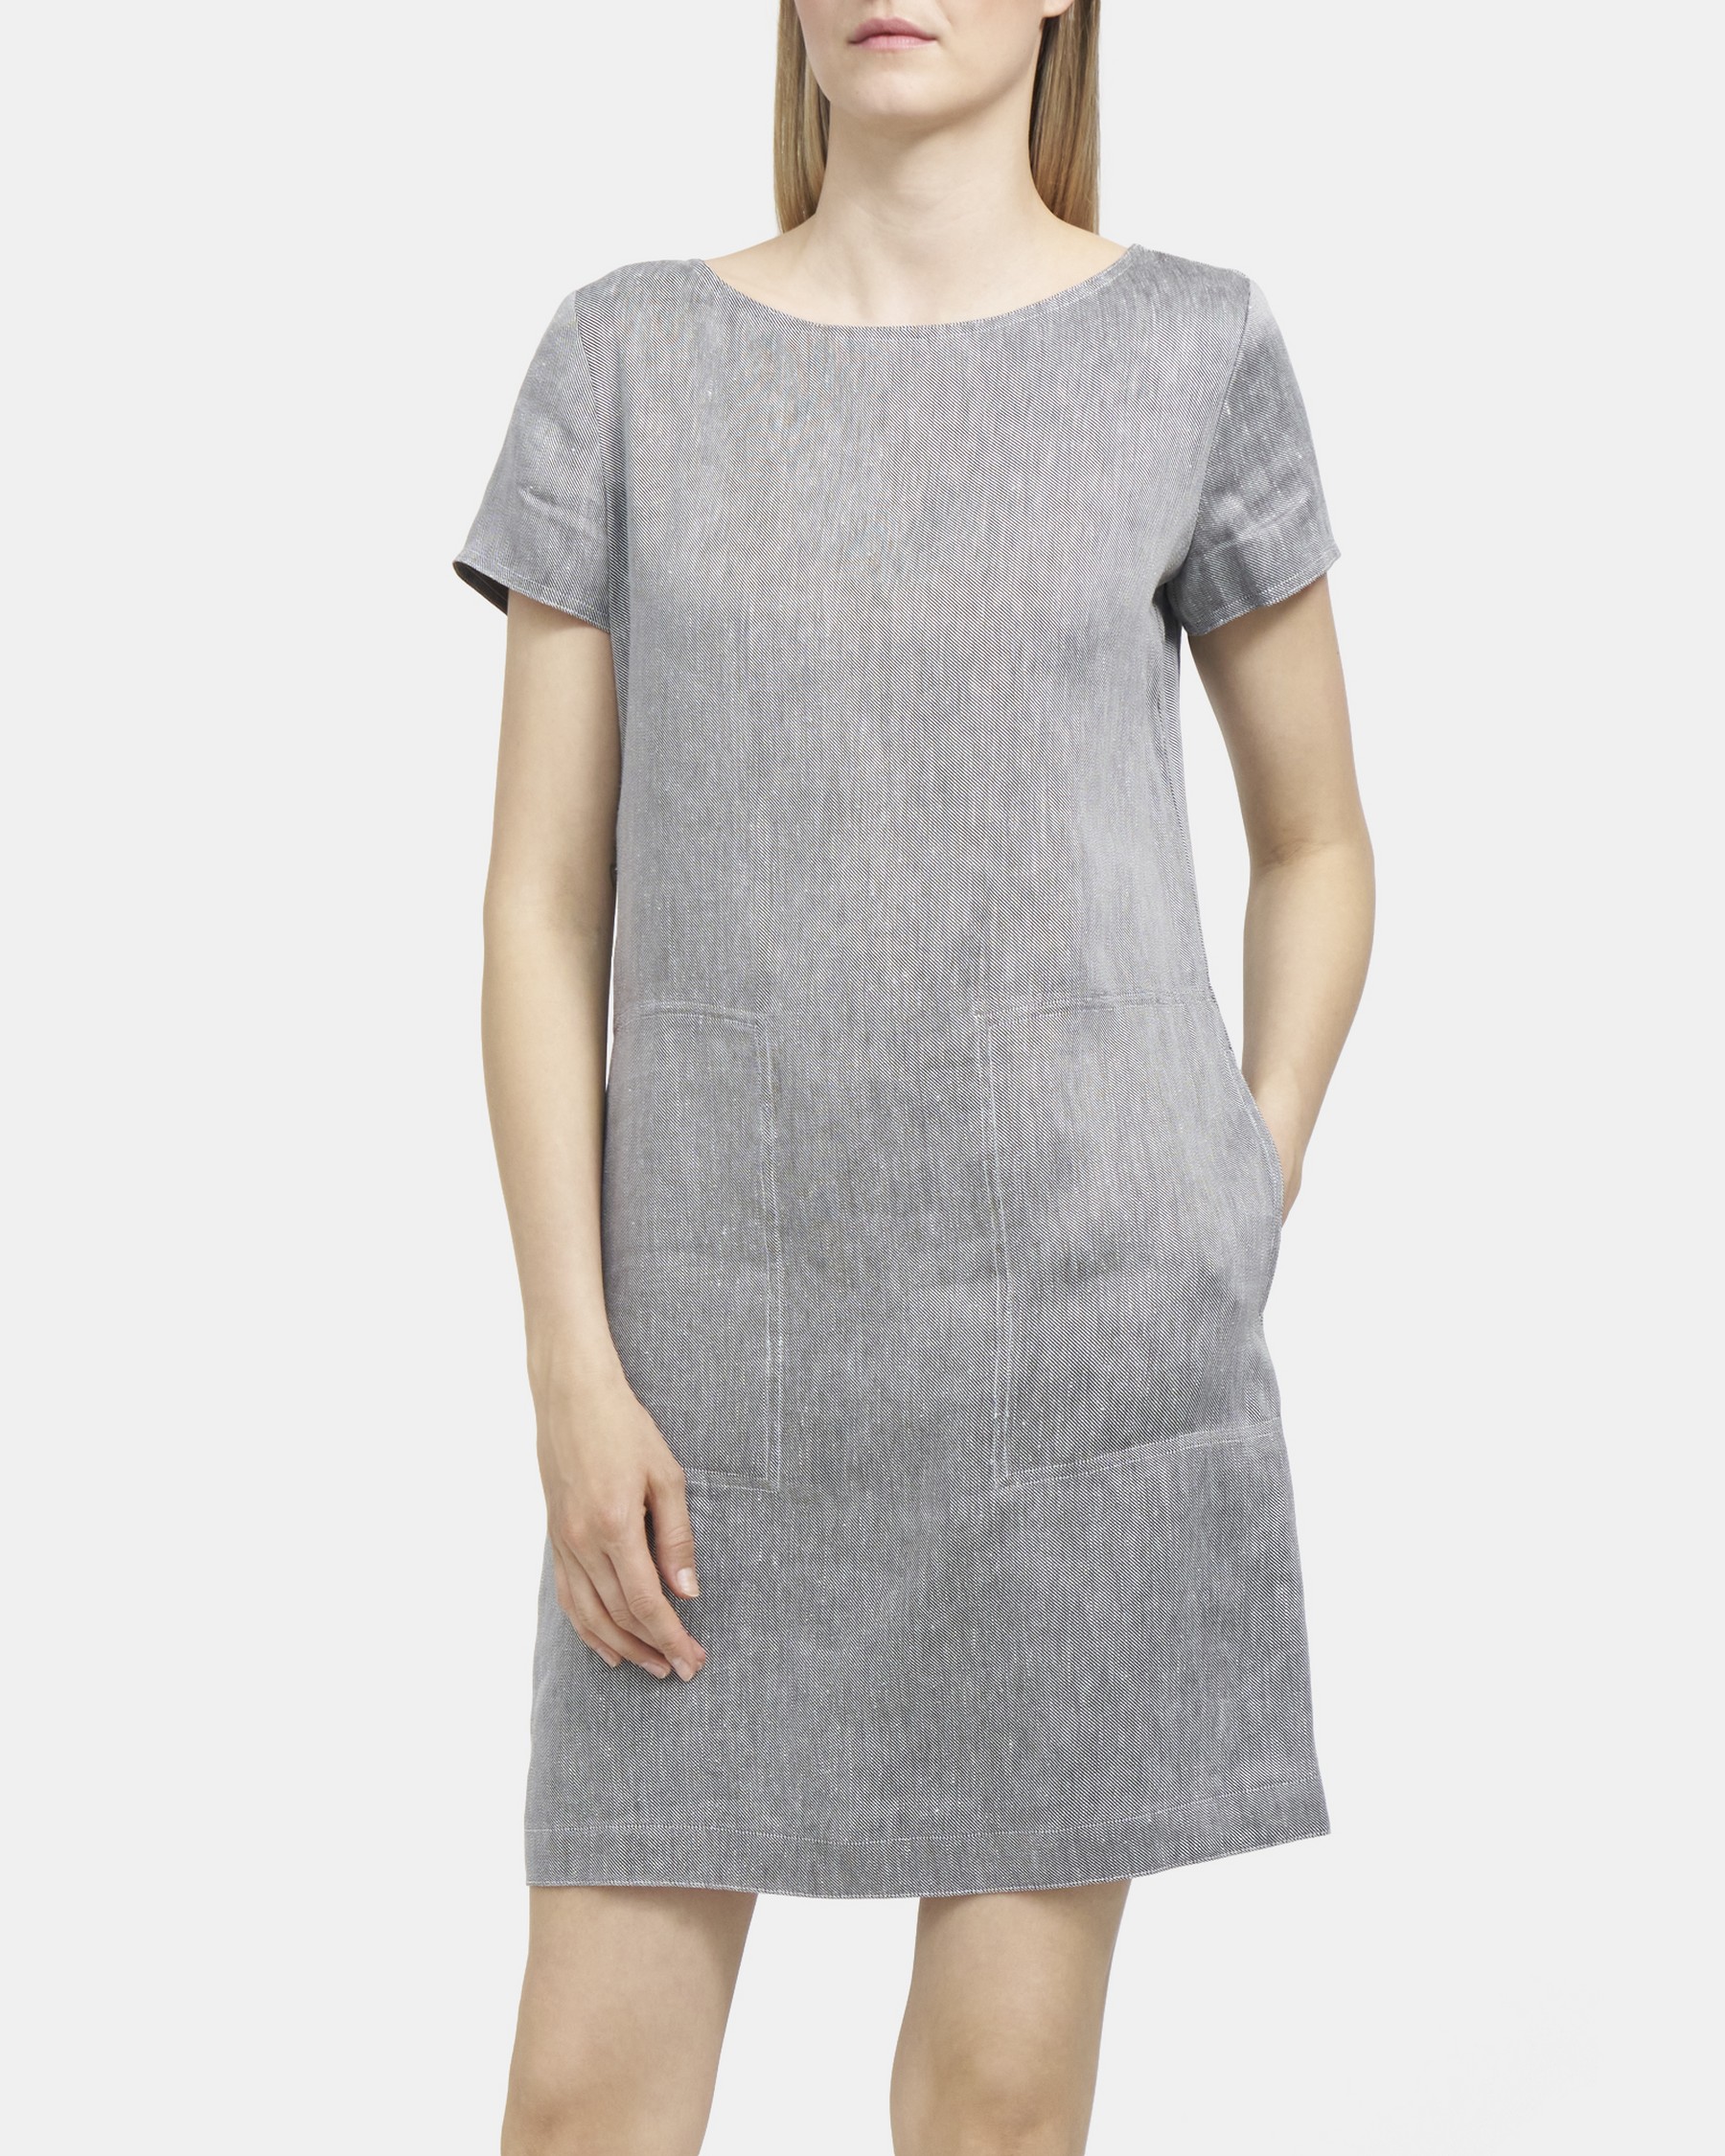 Structured Dress in Linen Twill